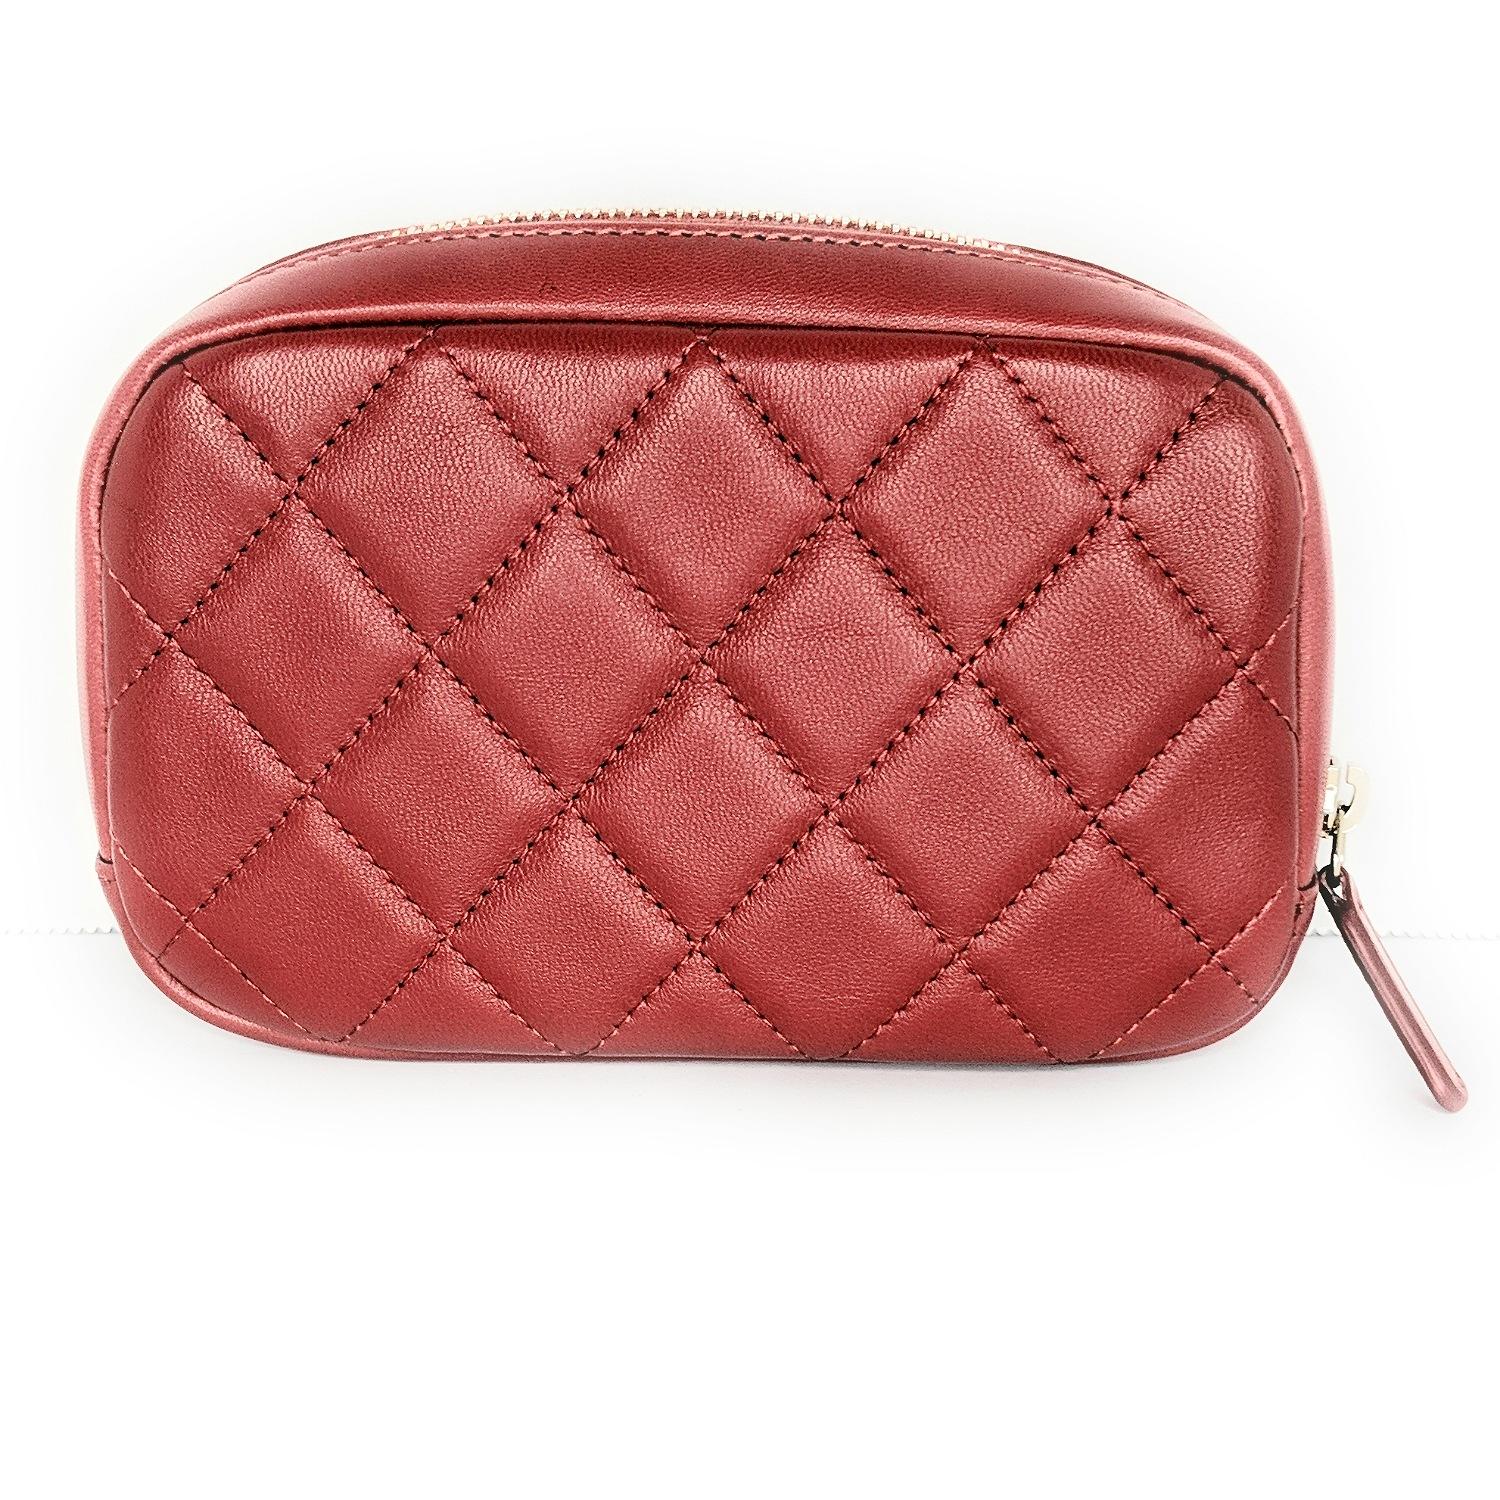 From the 2019 Collection. Red quilted Lambskin leather Chanel O-Case with gold-tone hardware, tonal quilted nylon lining, single slip pocket at interior wall and zip-closure at top.

Designer: Chanel
Material: Lambskin leather
Origin: Italy
Serial